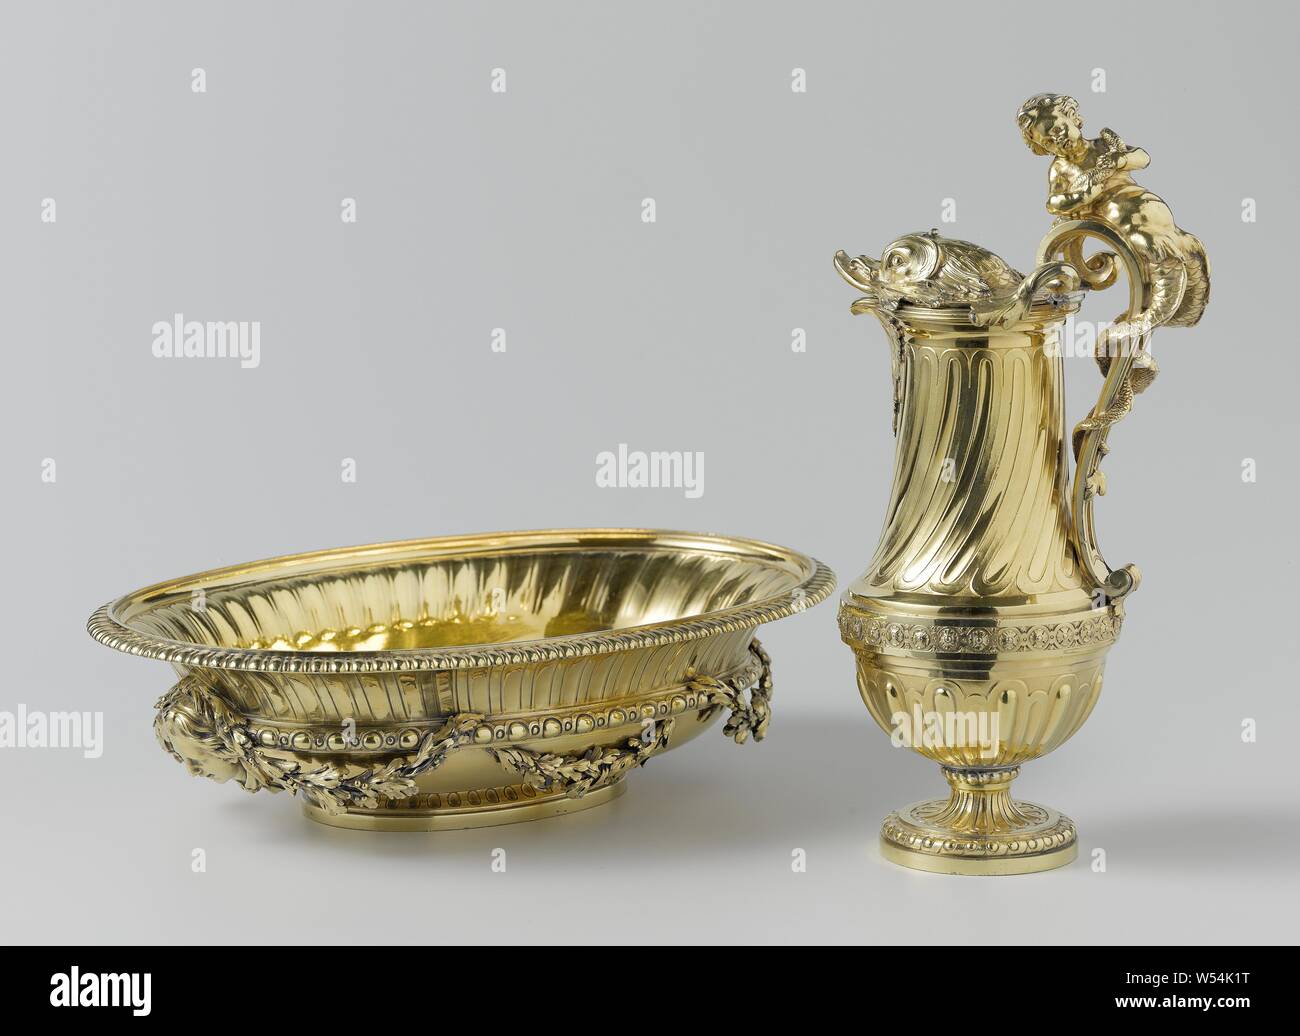 Ewer and basin, Water basin, Oval basin of gold-plated silver. The deep basin with godron rests on a low foot and is surrounded by garlands, hurled around a profile at half height. Women's masks at both ends, ornament, festoon, garland, Thomas Chancellier, Paris, 1765, silver (metal), gilding (material), gilding, w 36.5 cm × d 24.5 cm w 15.8 cm × d 10.5 cm w 2552 Stock Photo